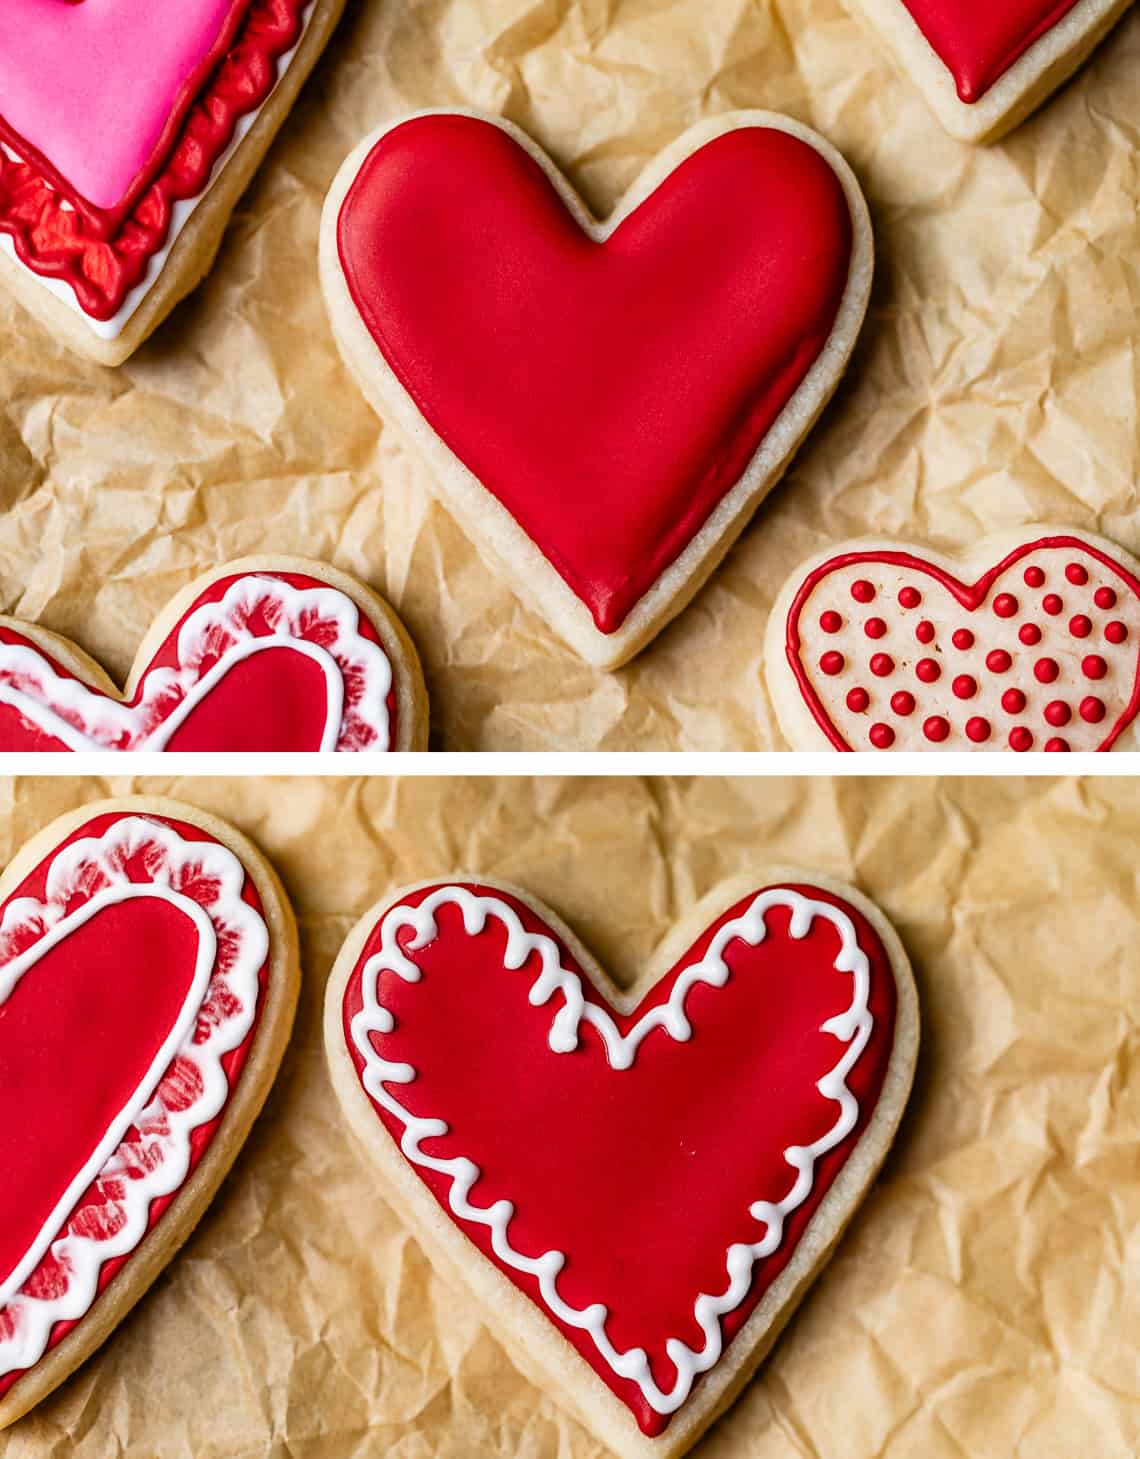 top heart shaped cookie with red frosting that has dried overnight, bottom adding white as lace over red.